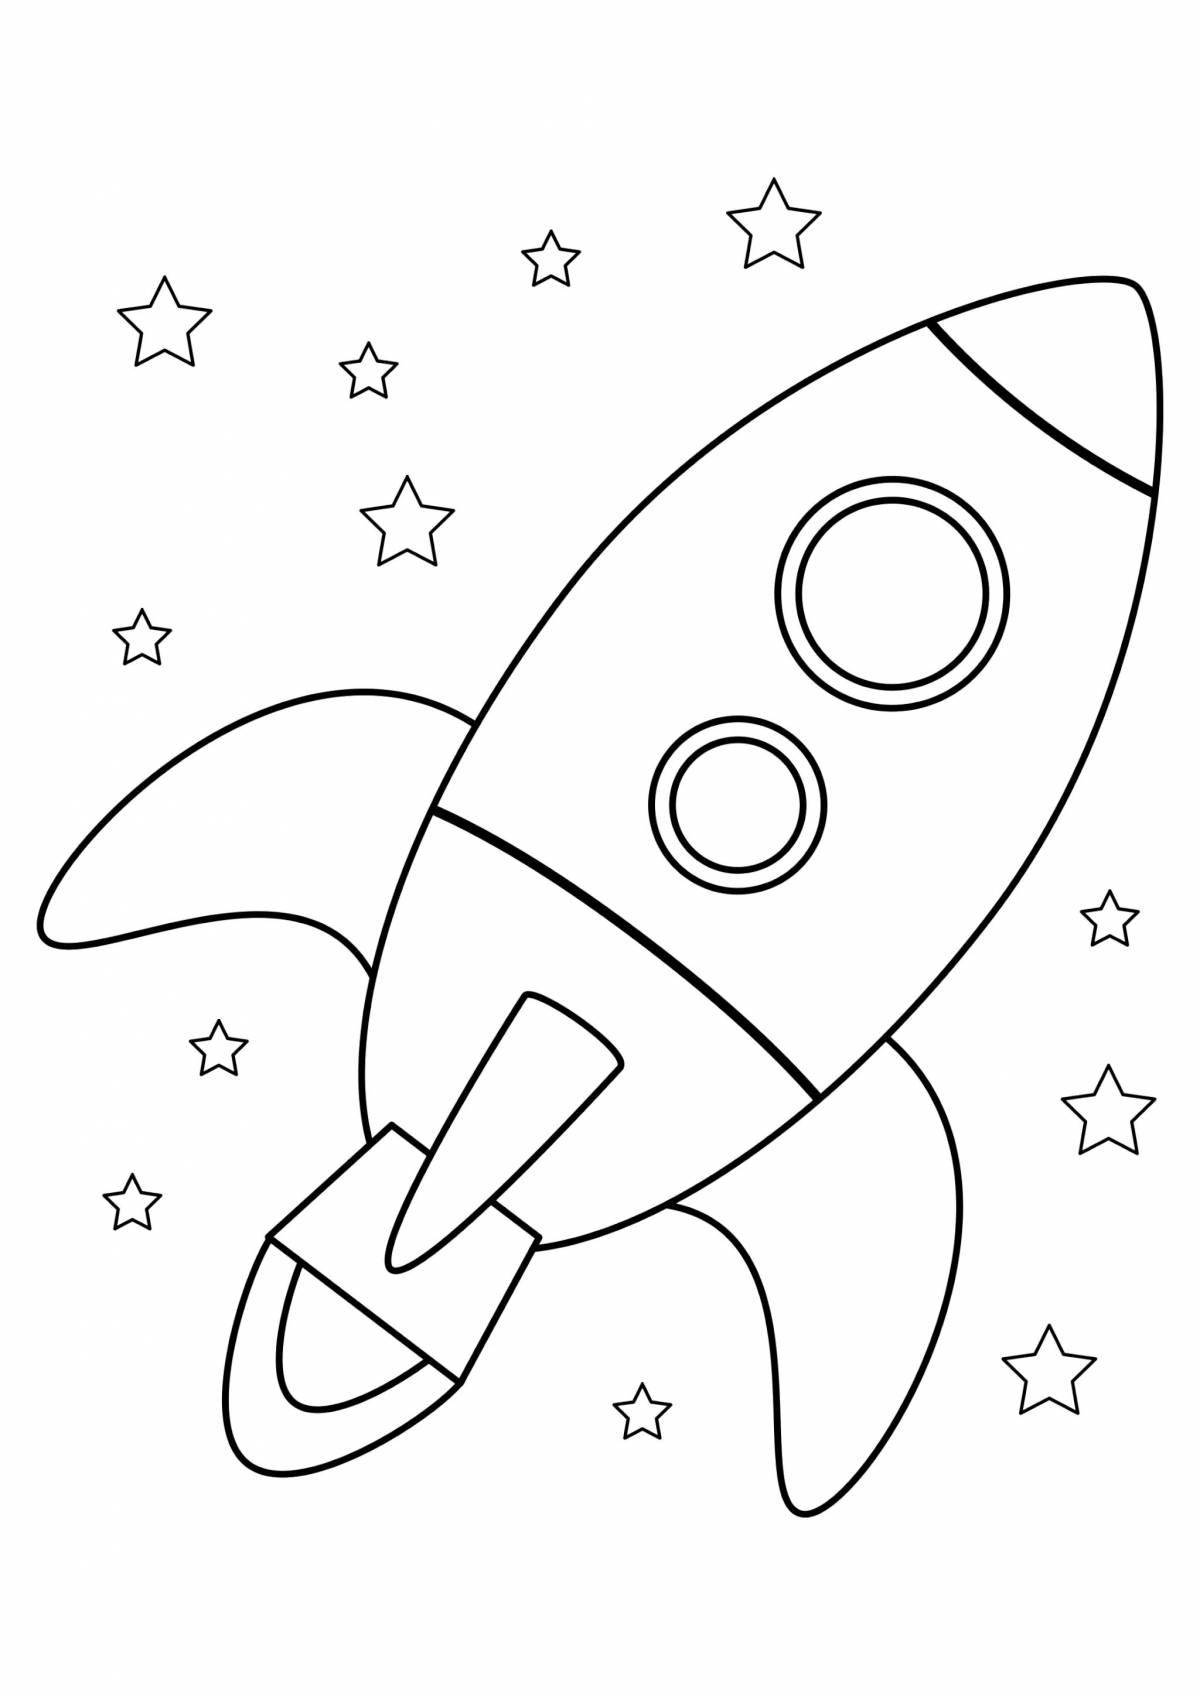 Colorful rocket coloring book for boys